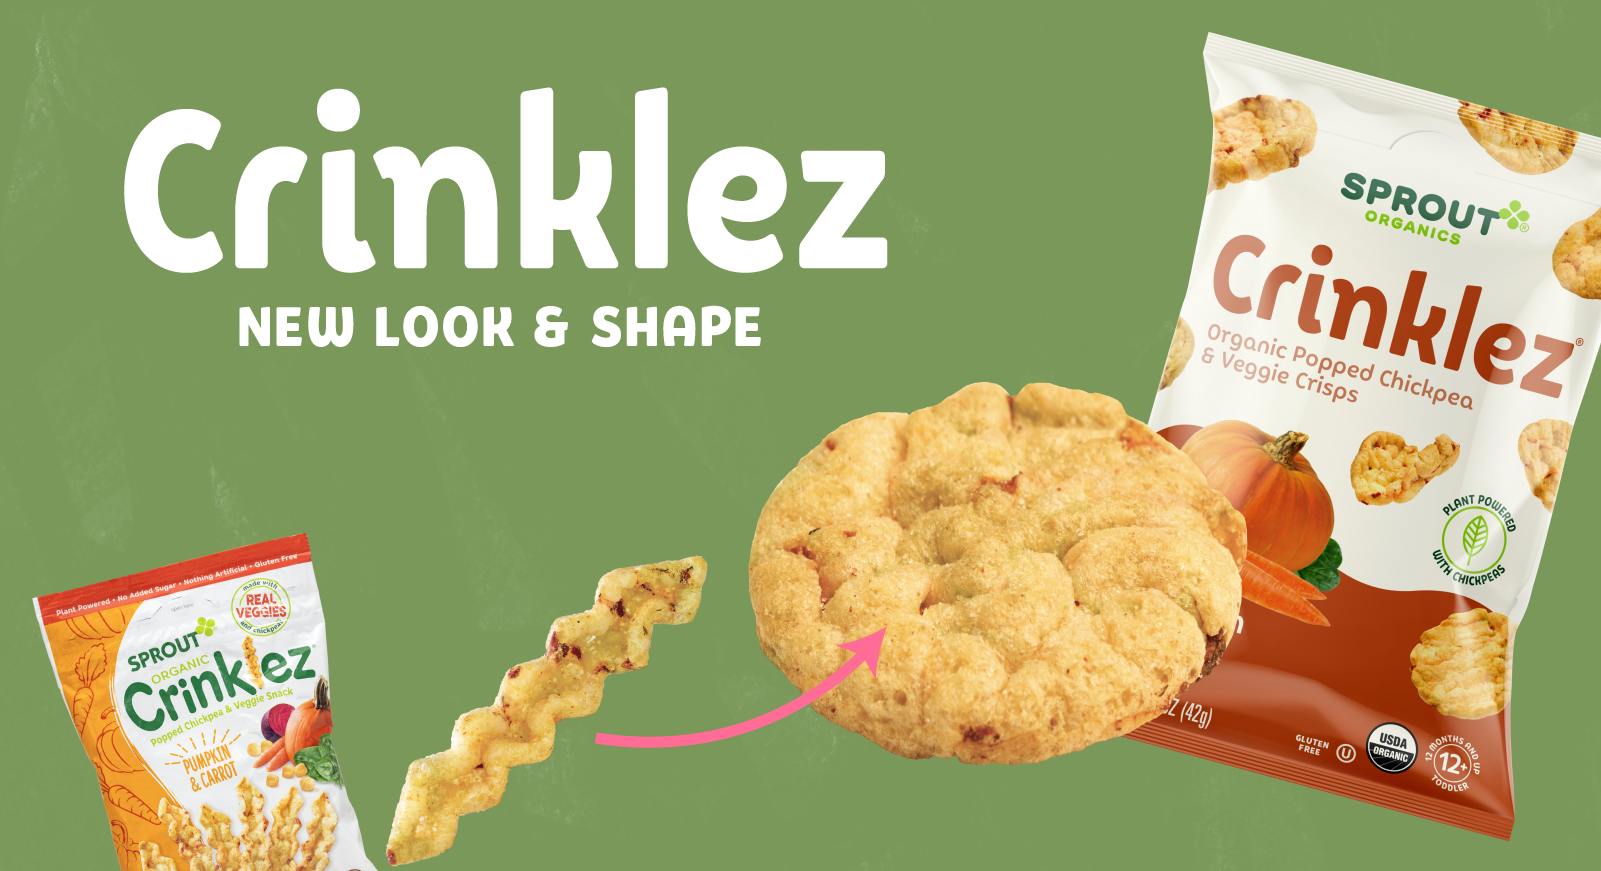 Original Crinklez stick is now a disc shaped snack in new packaging